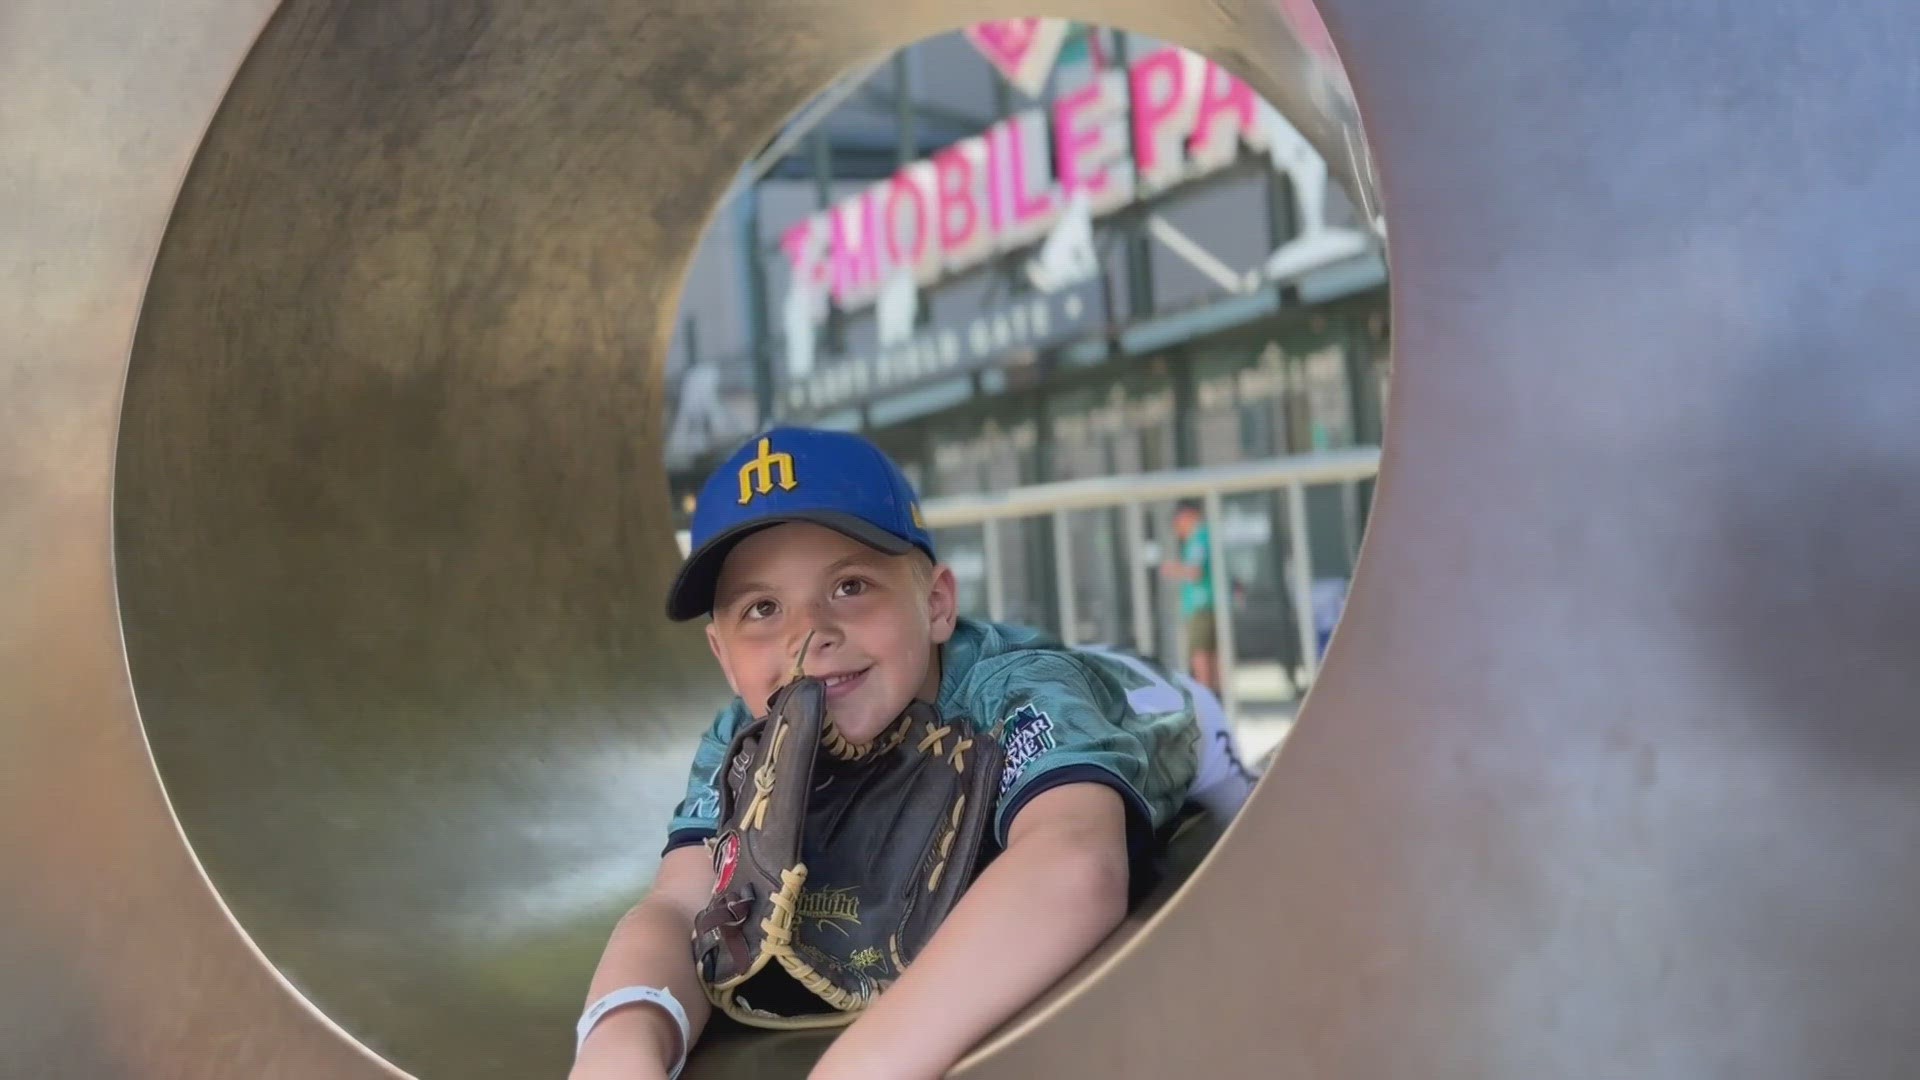 “I get to say play ball, too!” said 8-year-old Brayden Friberg.